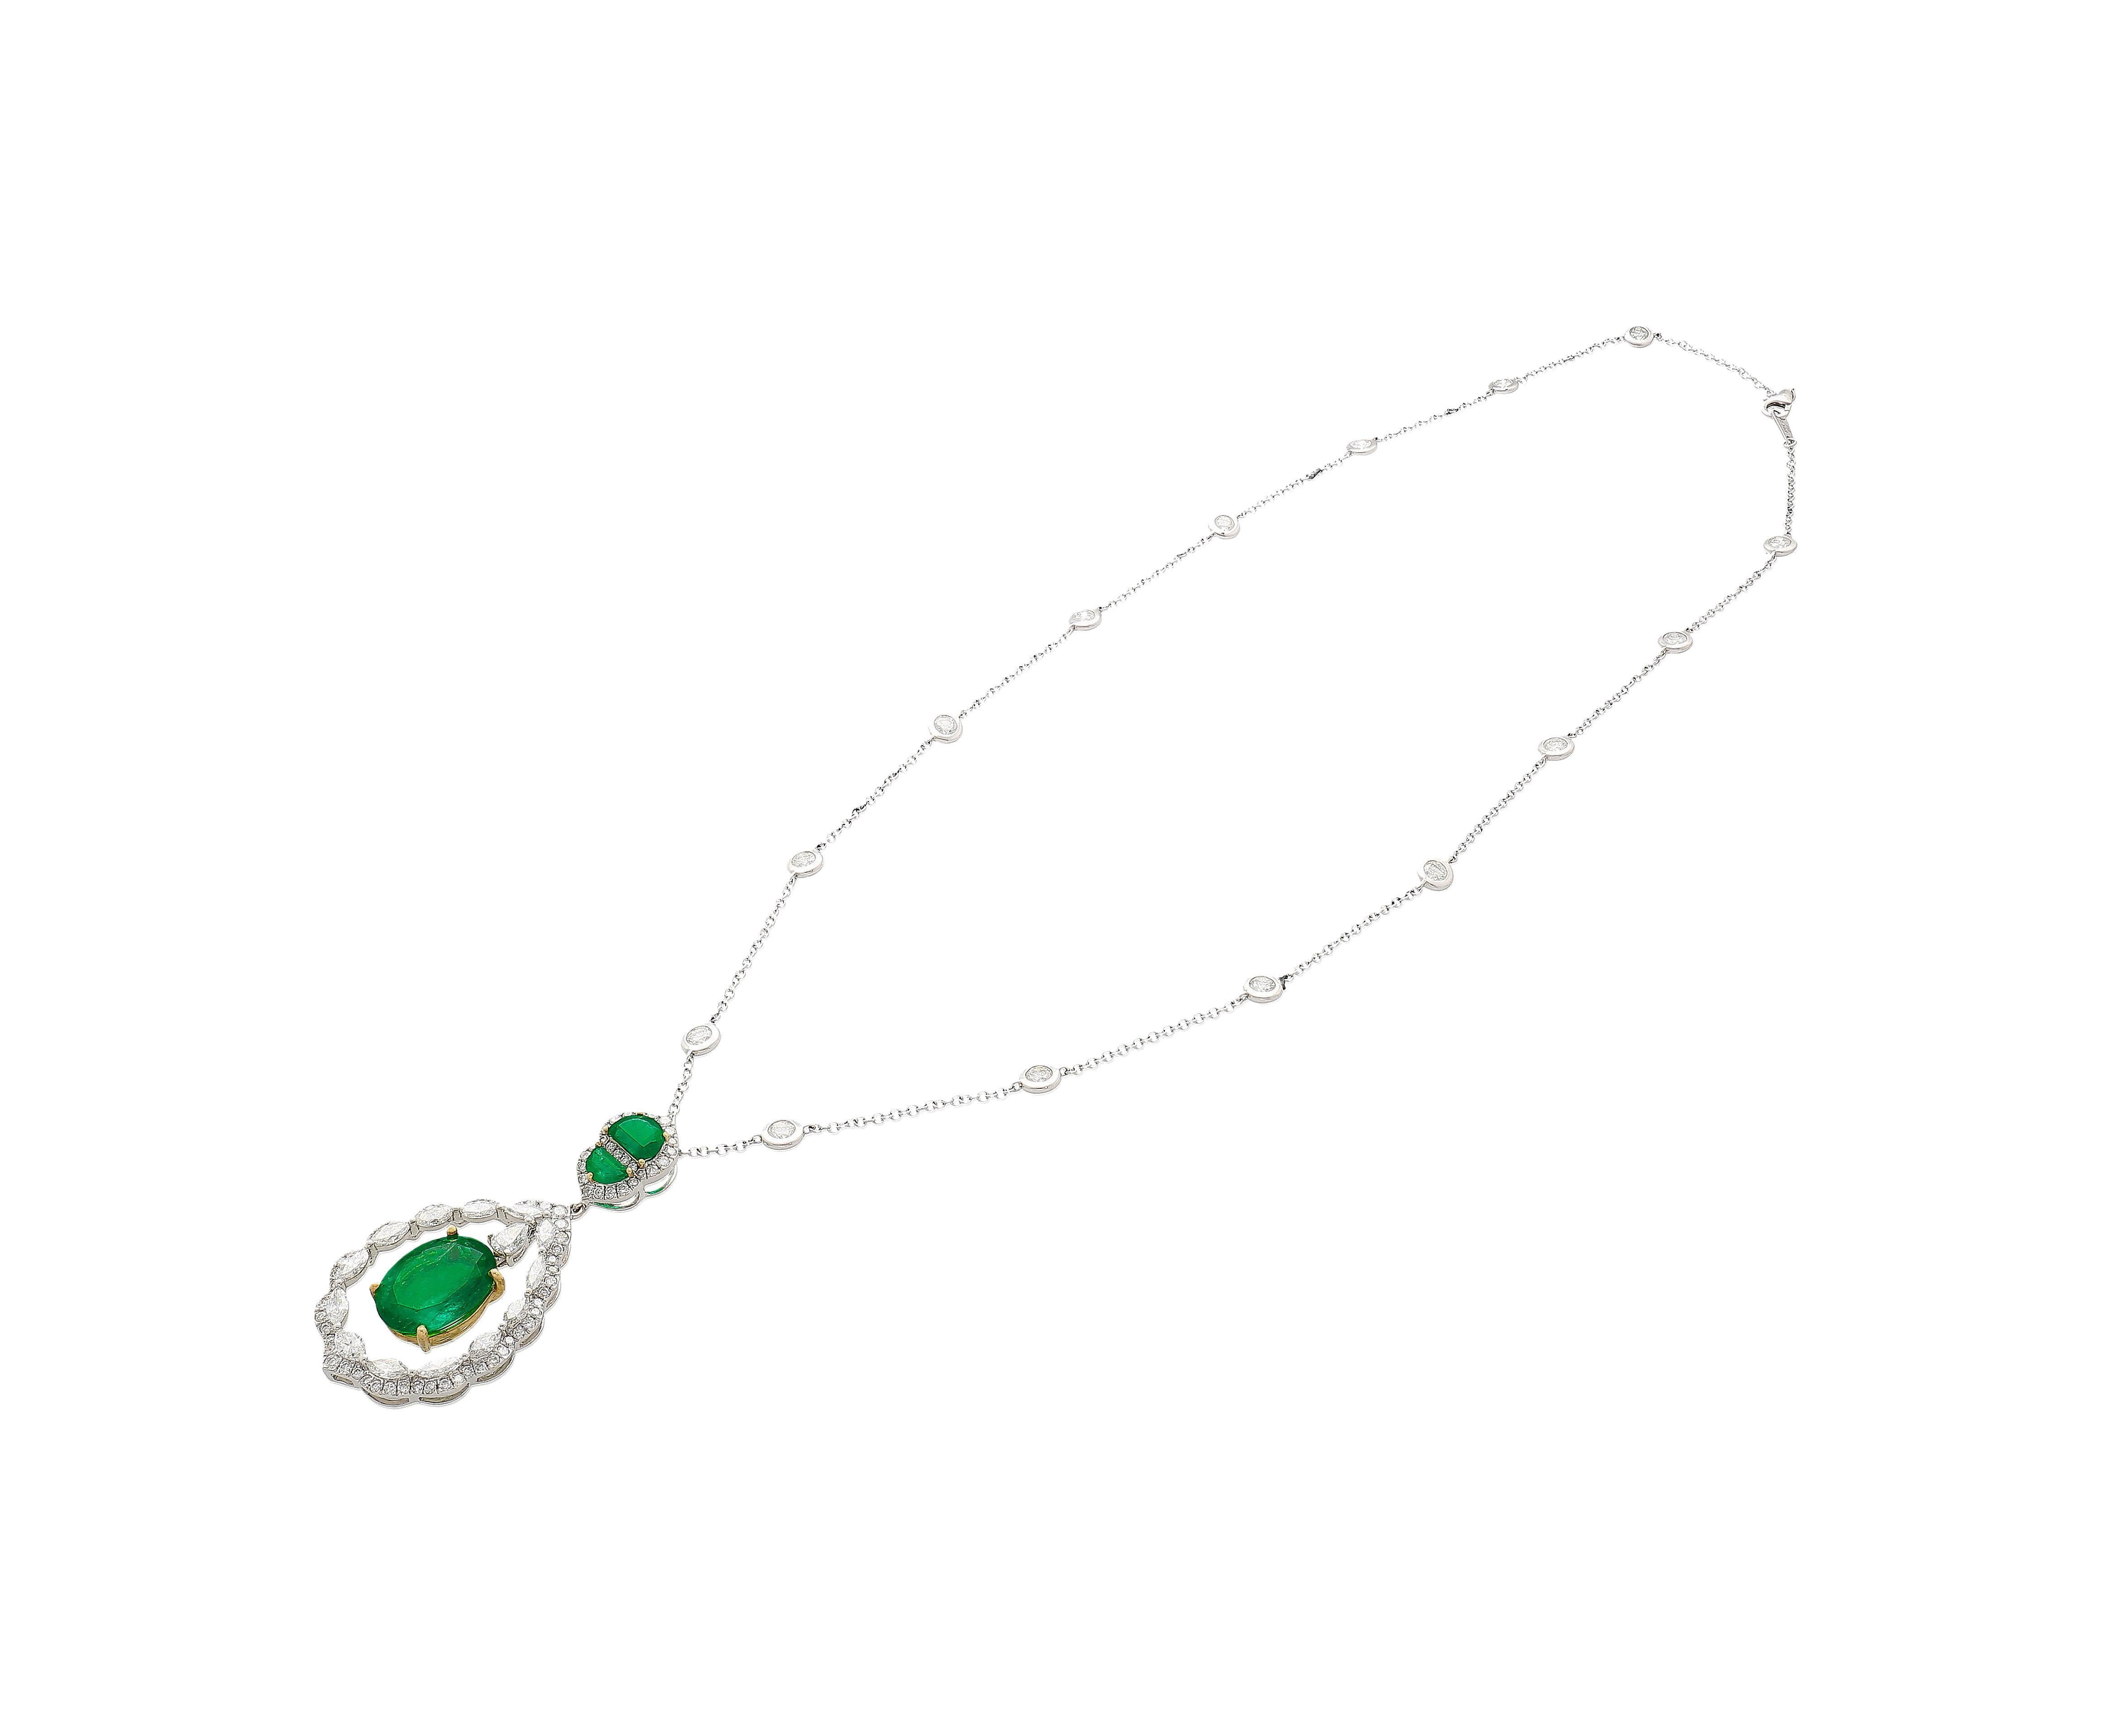 6.42 Carat Floating Emerald with Diamond & Emeralds in 18K Pendant Necklace For Sale 2